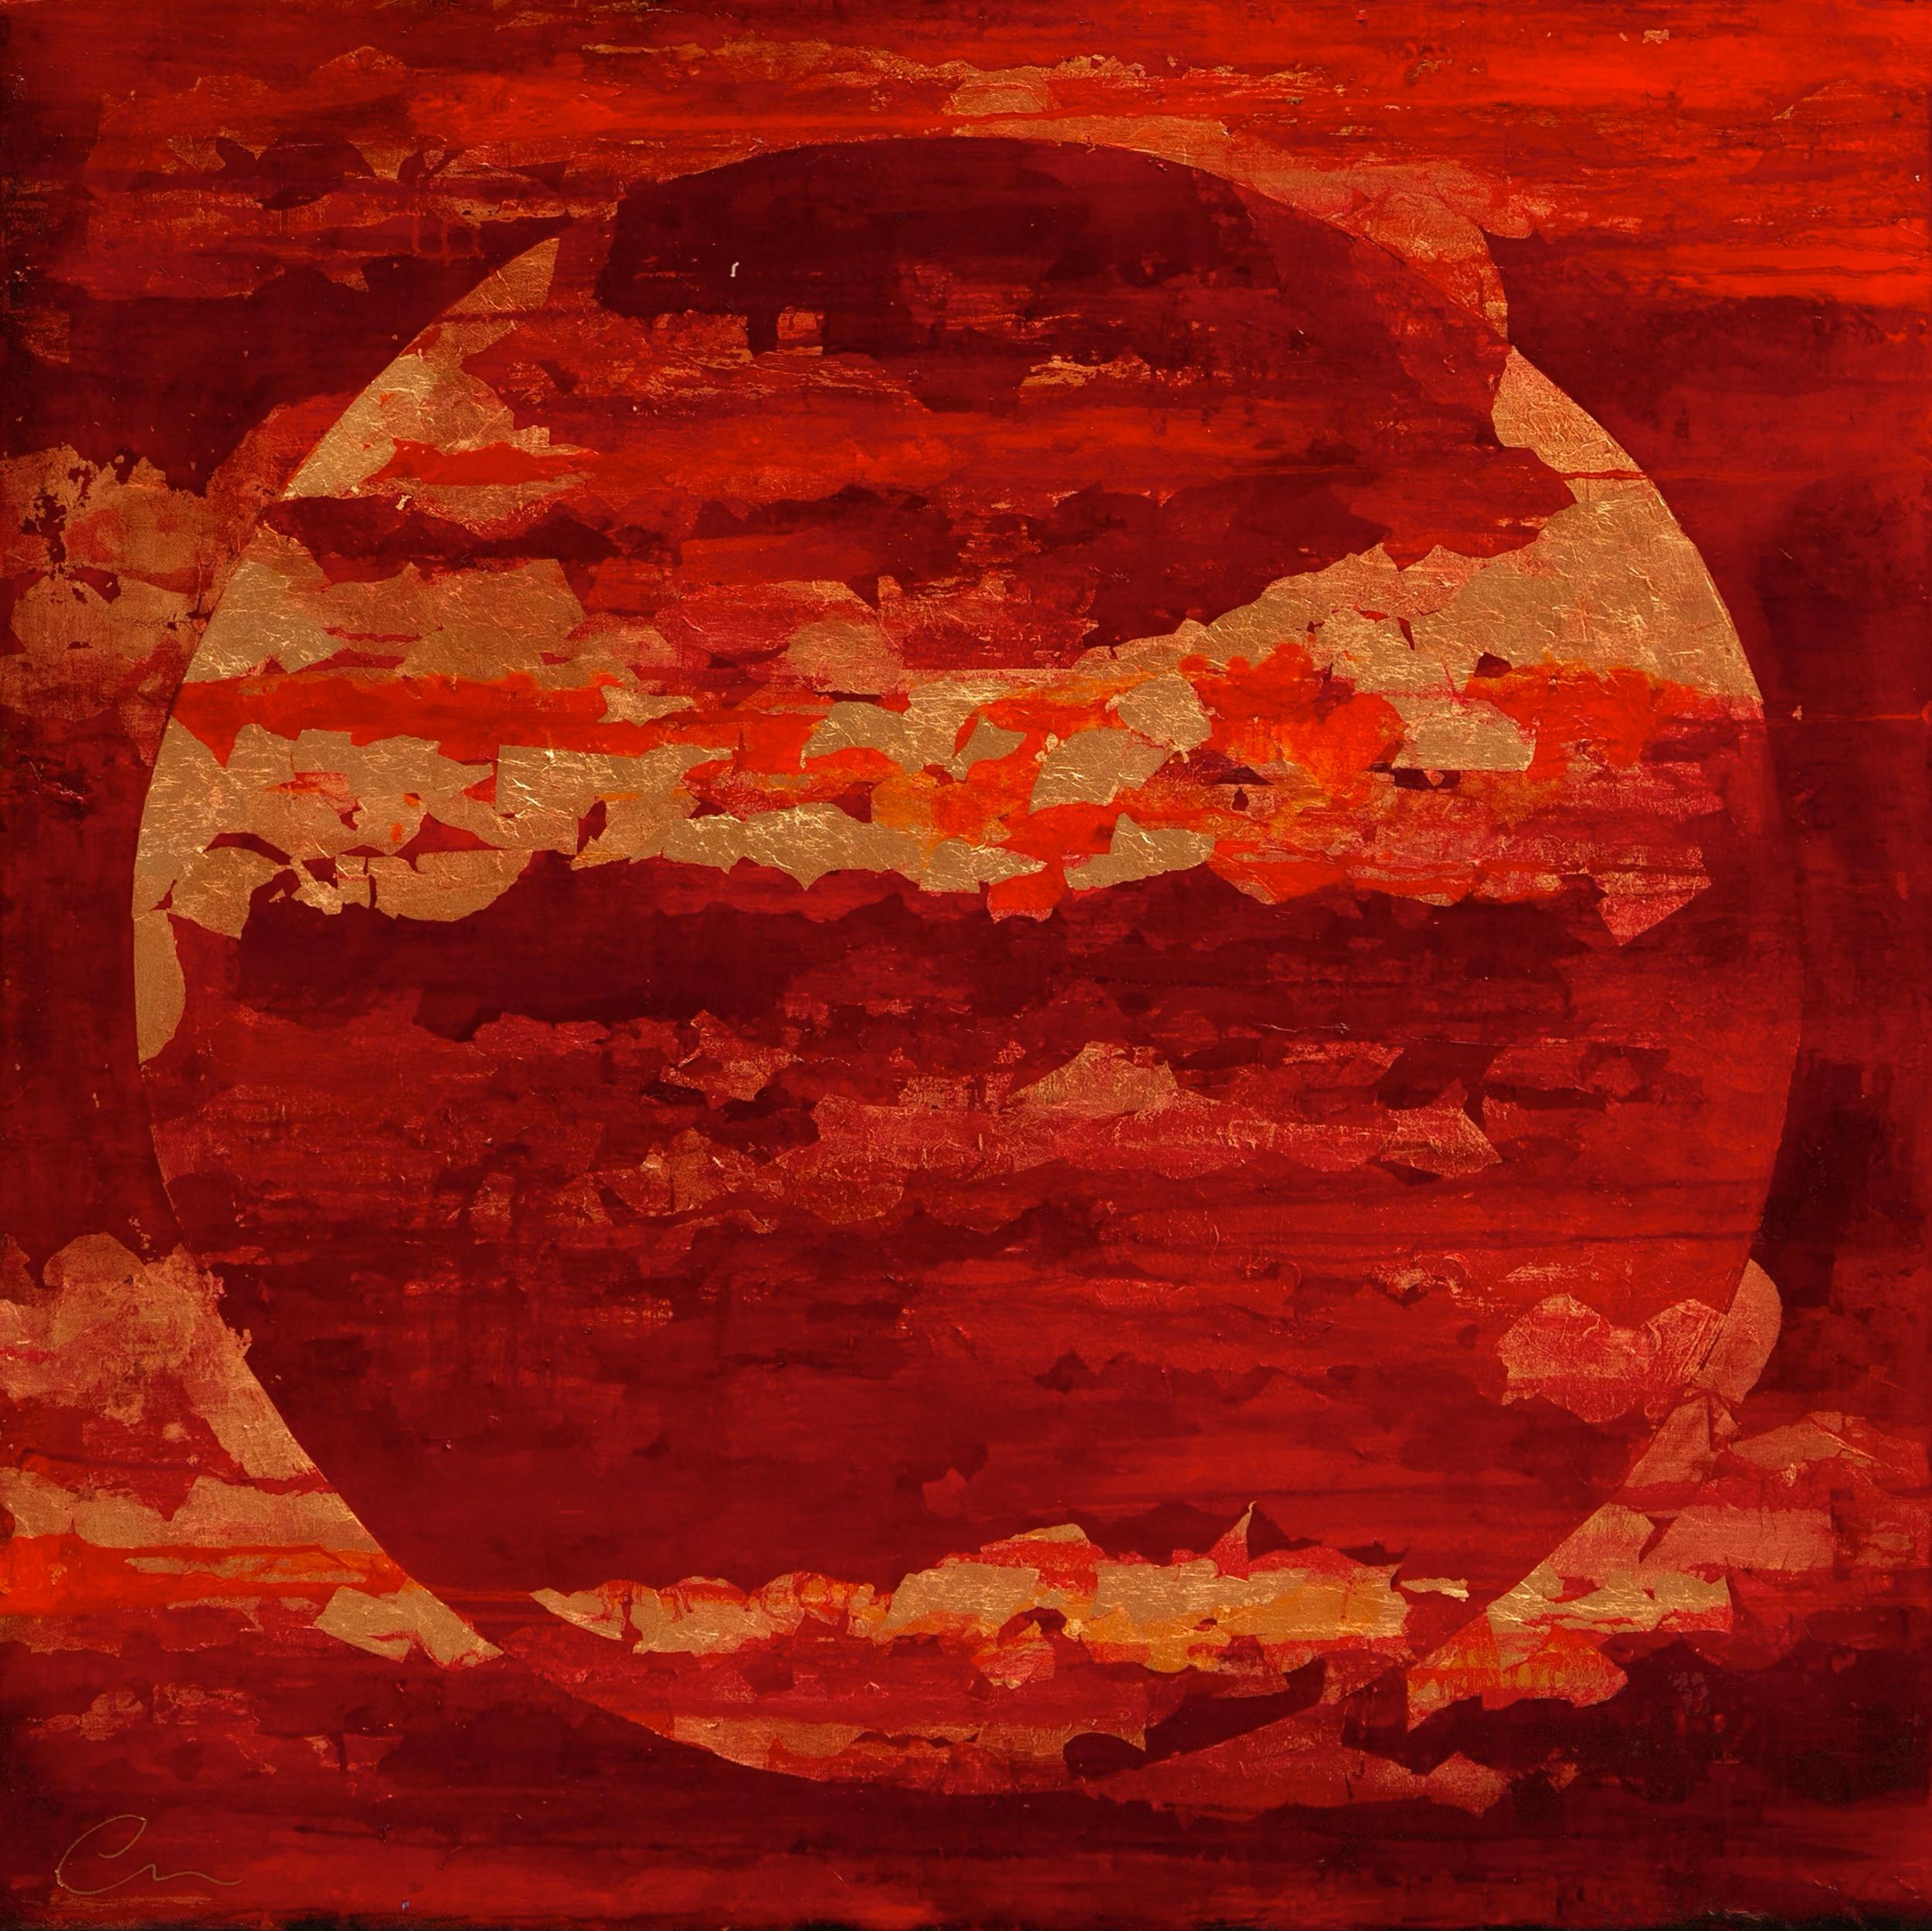 Red Moon - 21st Century, Contemporary, Abstract Painting, Gold Leaf - Mixed Media Art by Chelsea Davine